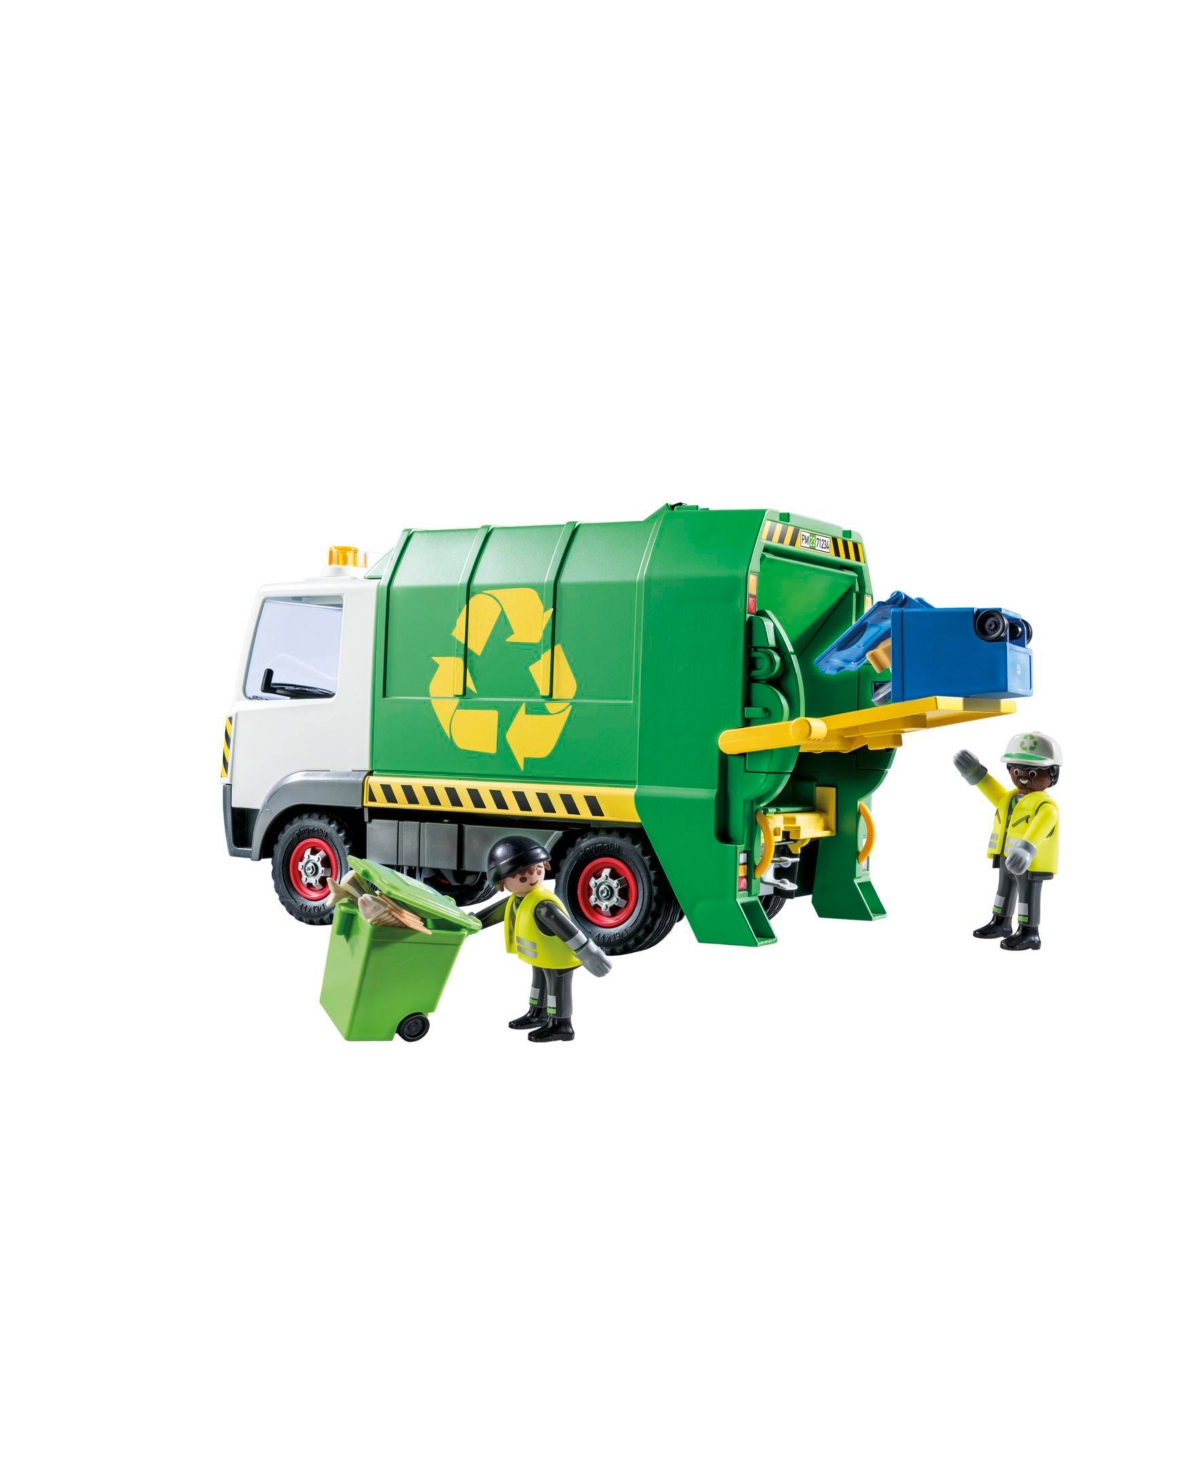 Playmobil Recycle Truck In Multi